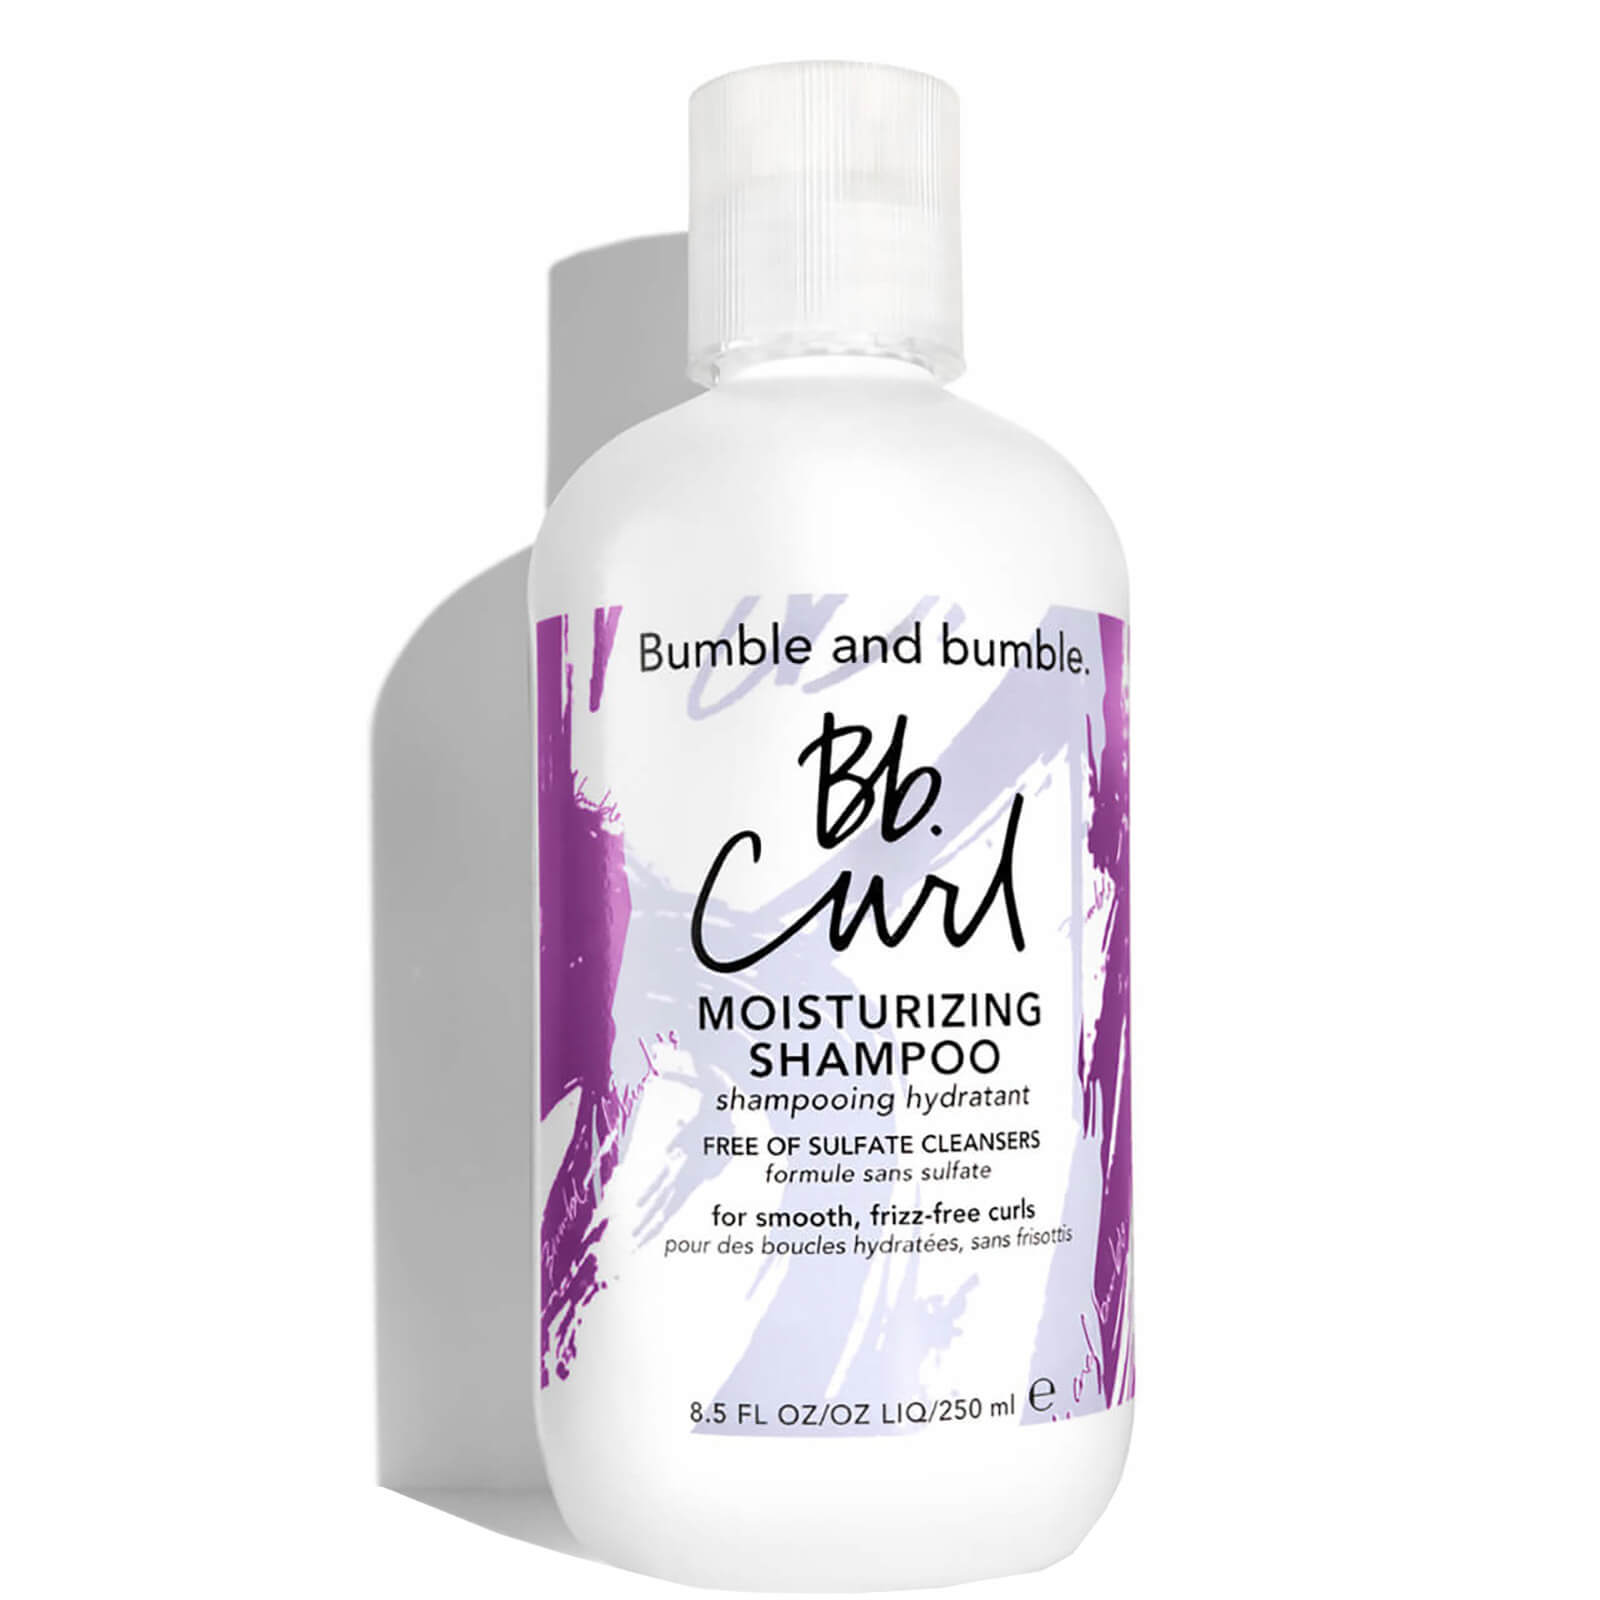 Bumble and bumble Curl Shampoo 60ml